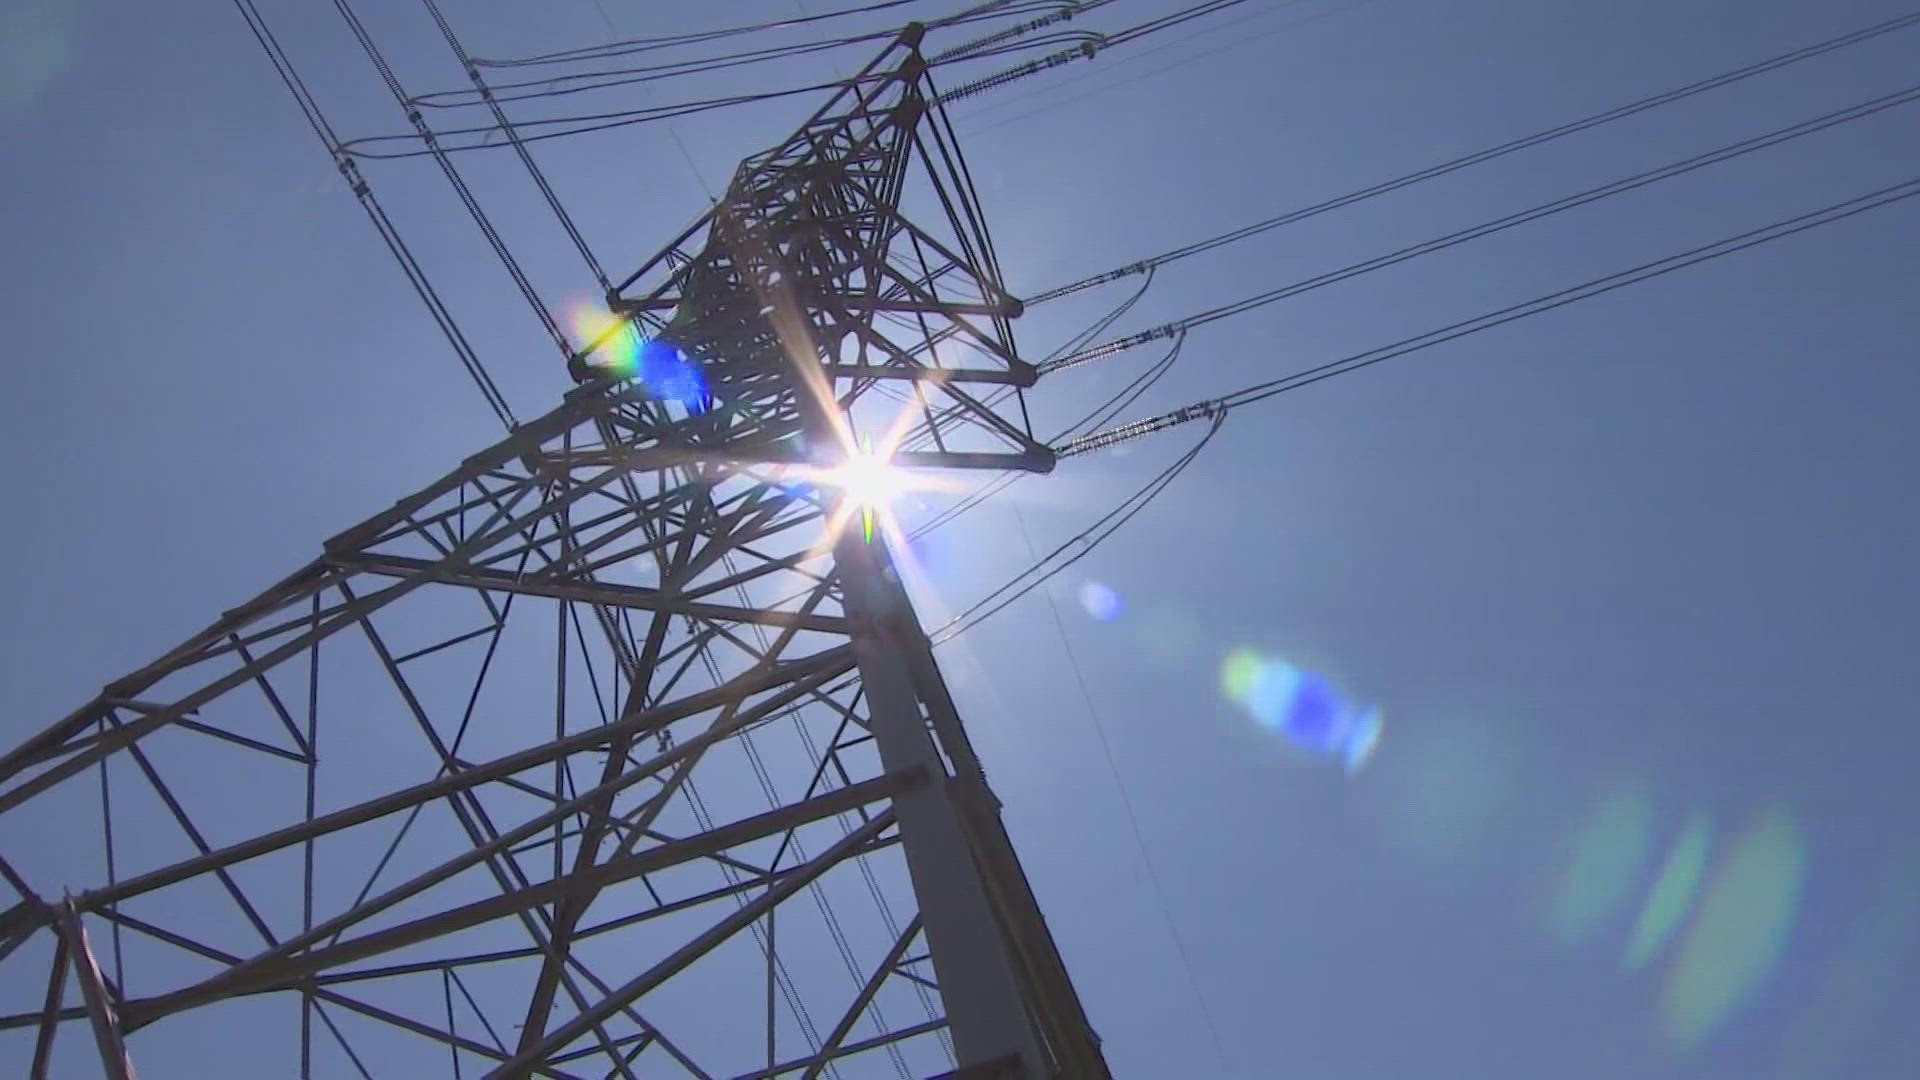 With temperatures in the triple digits across the state, all eyes are on the power grid.